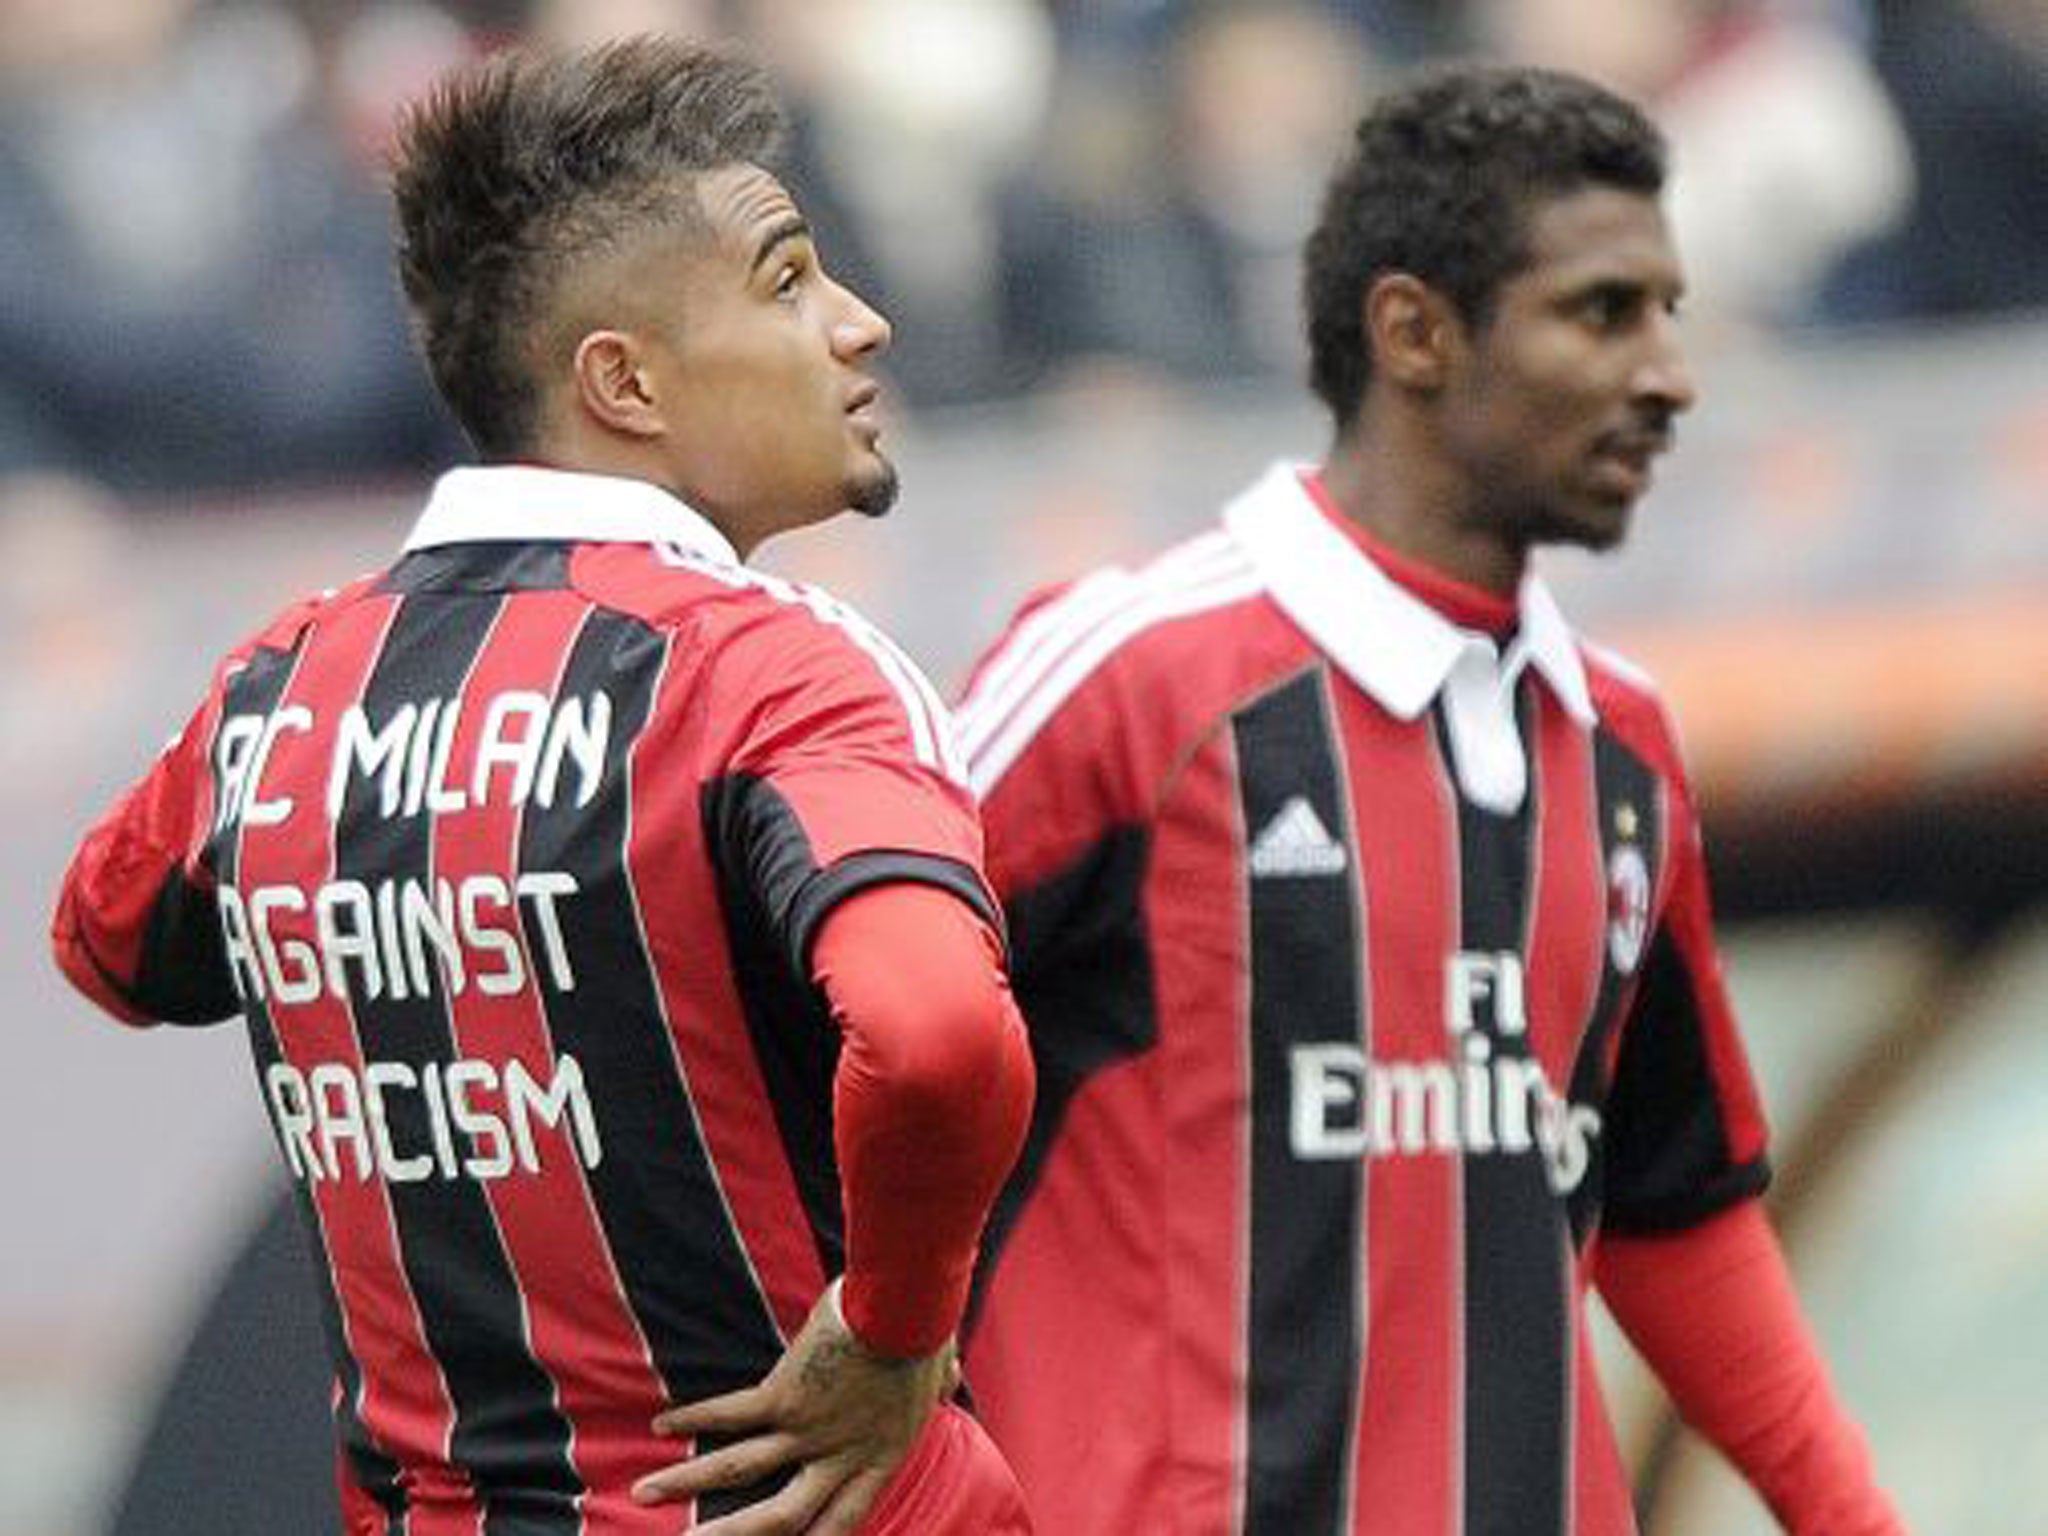 Milan’s Kevin-Prince Boateng (left) and Kevin Constant wear anti-racism shirts before their game against Siena yesterday